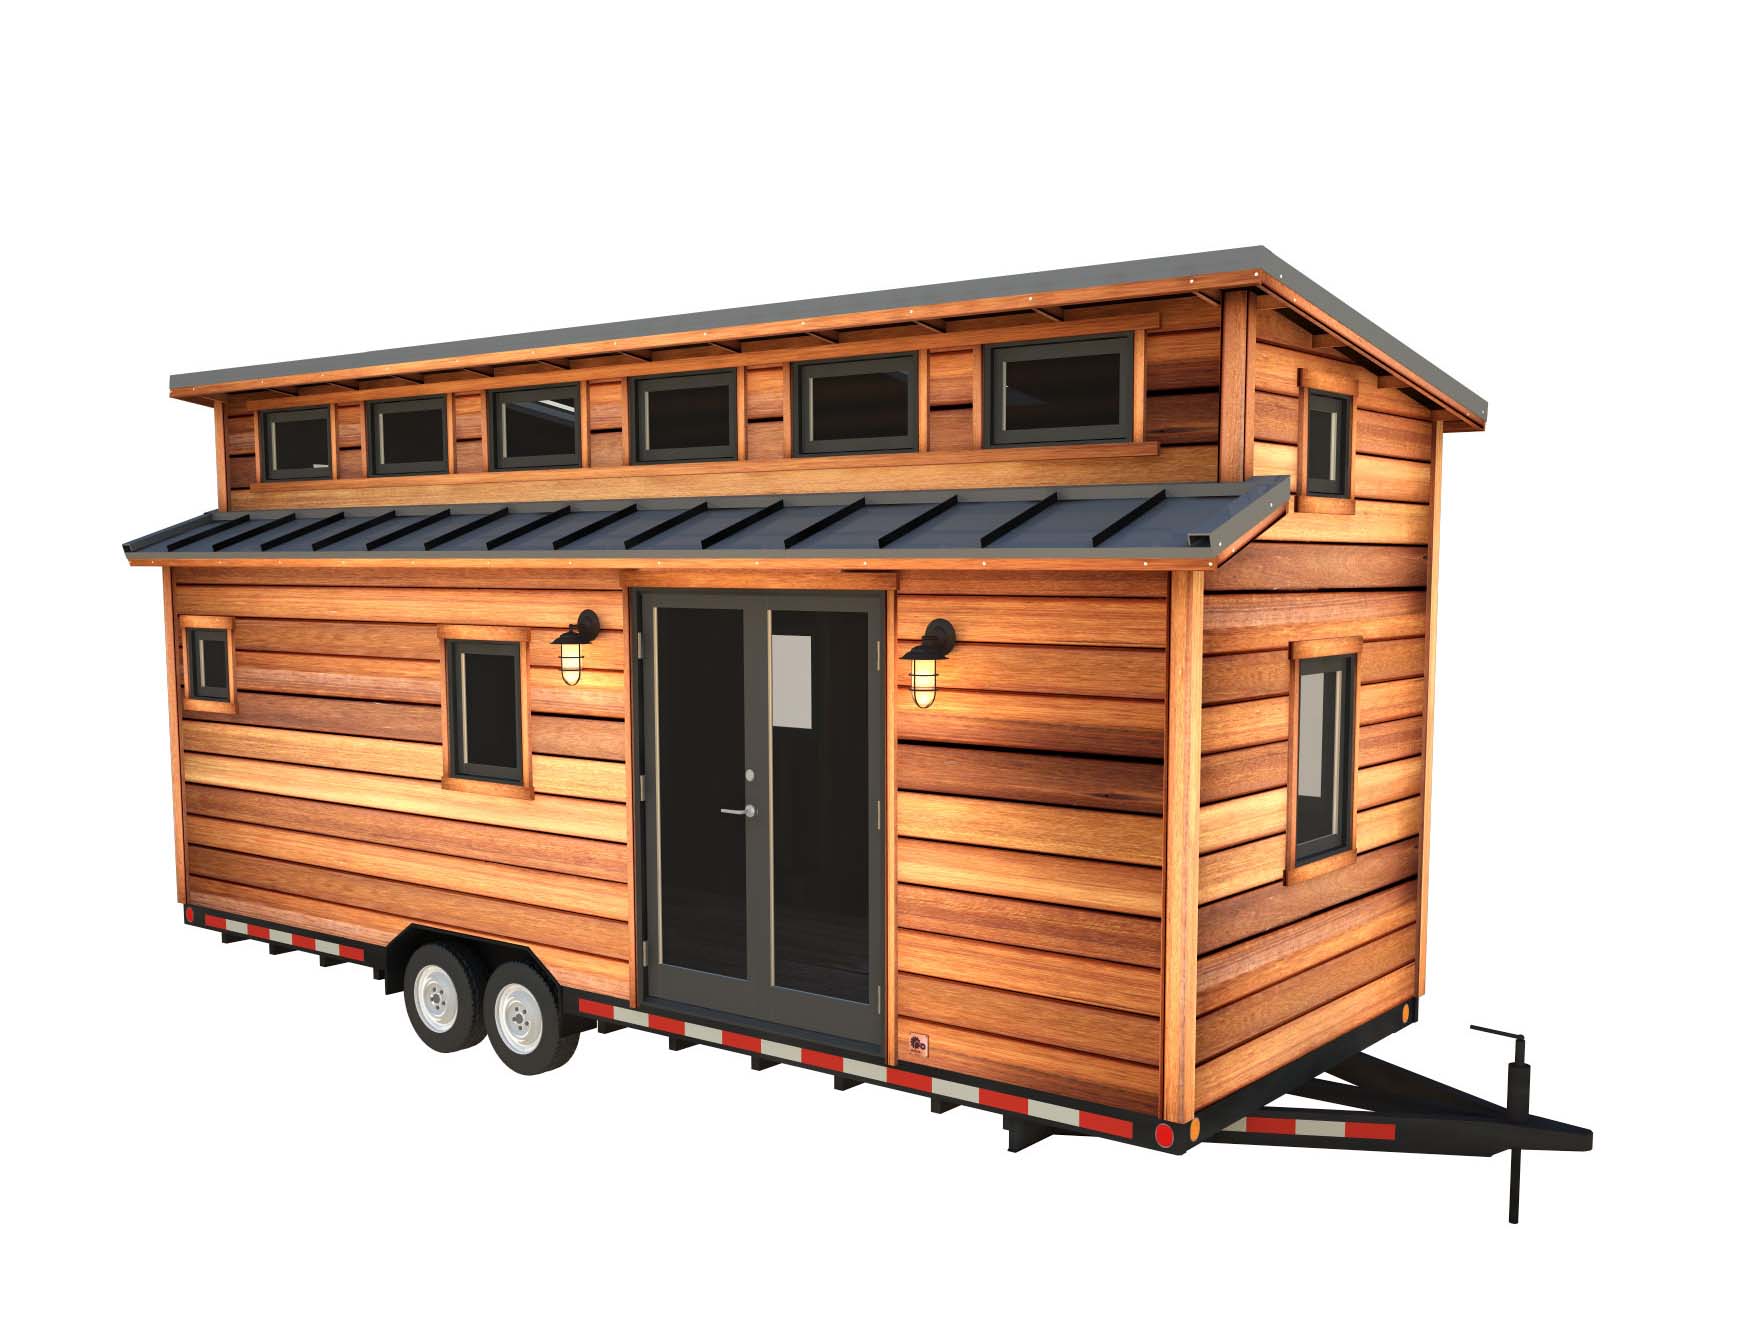 The Cider Box Modern Tiny House Plans for Your Home on Wheels